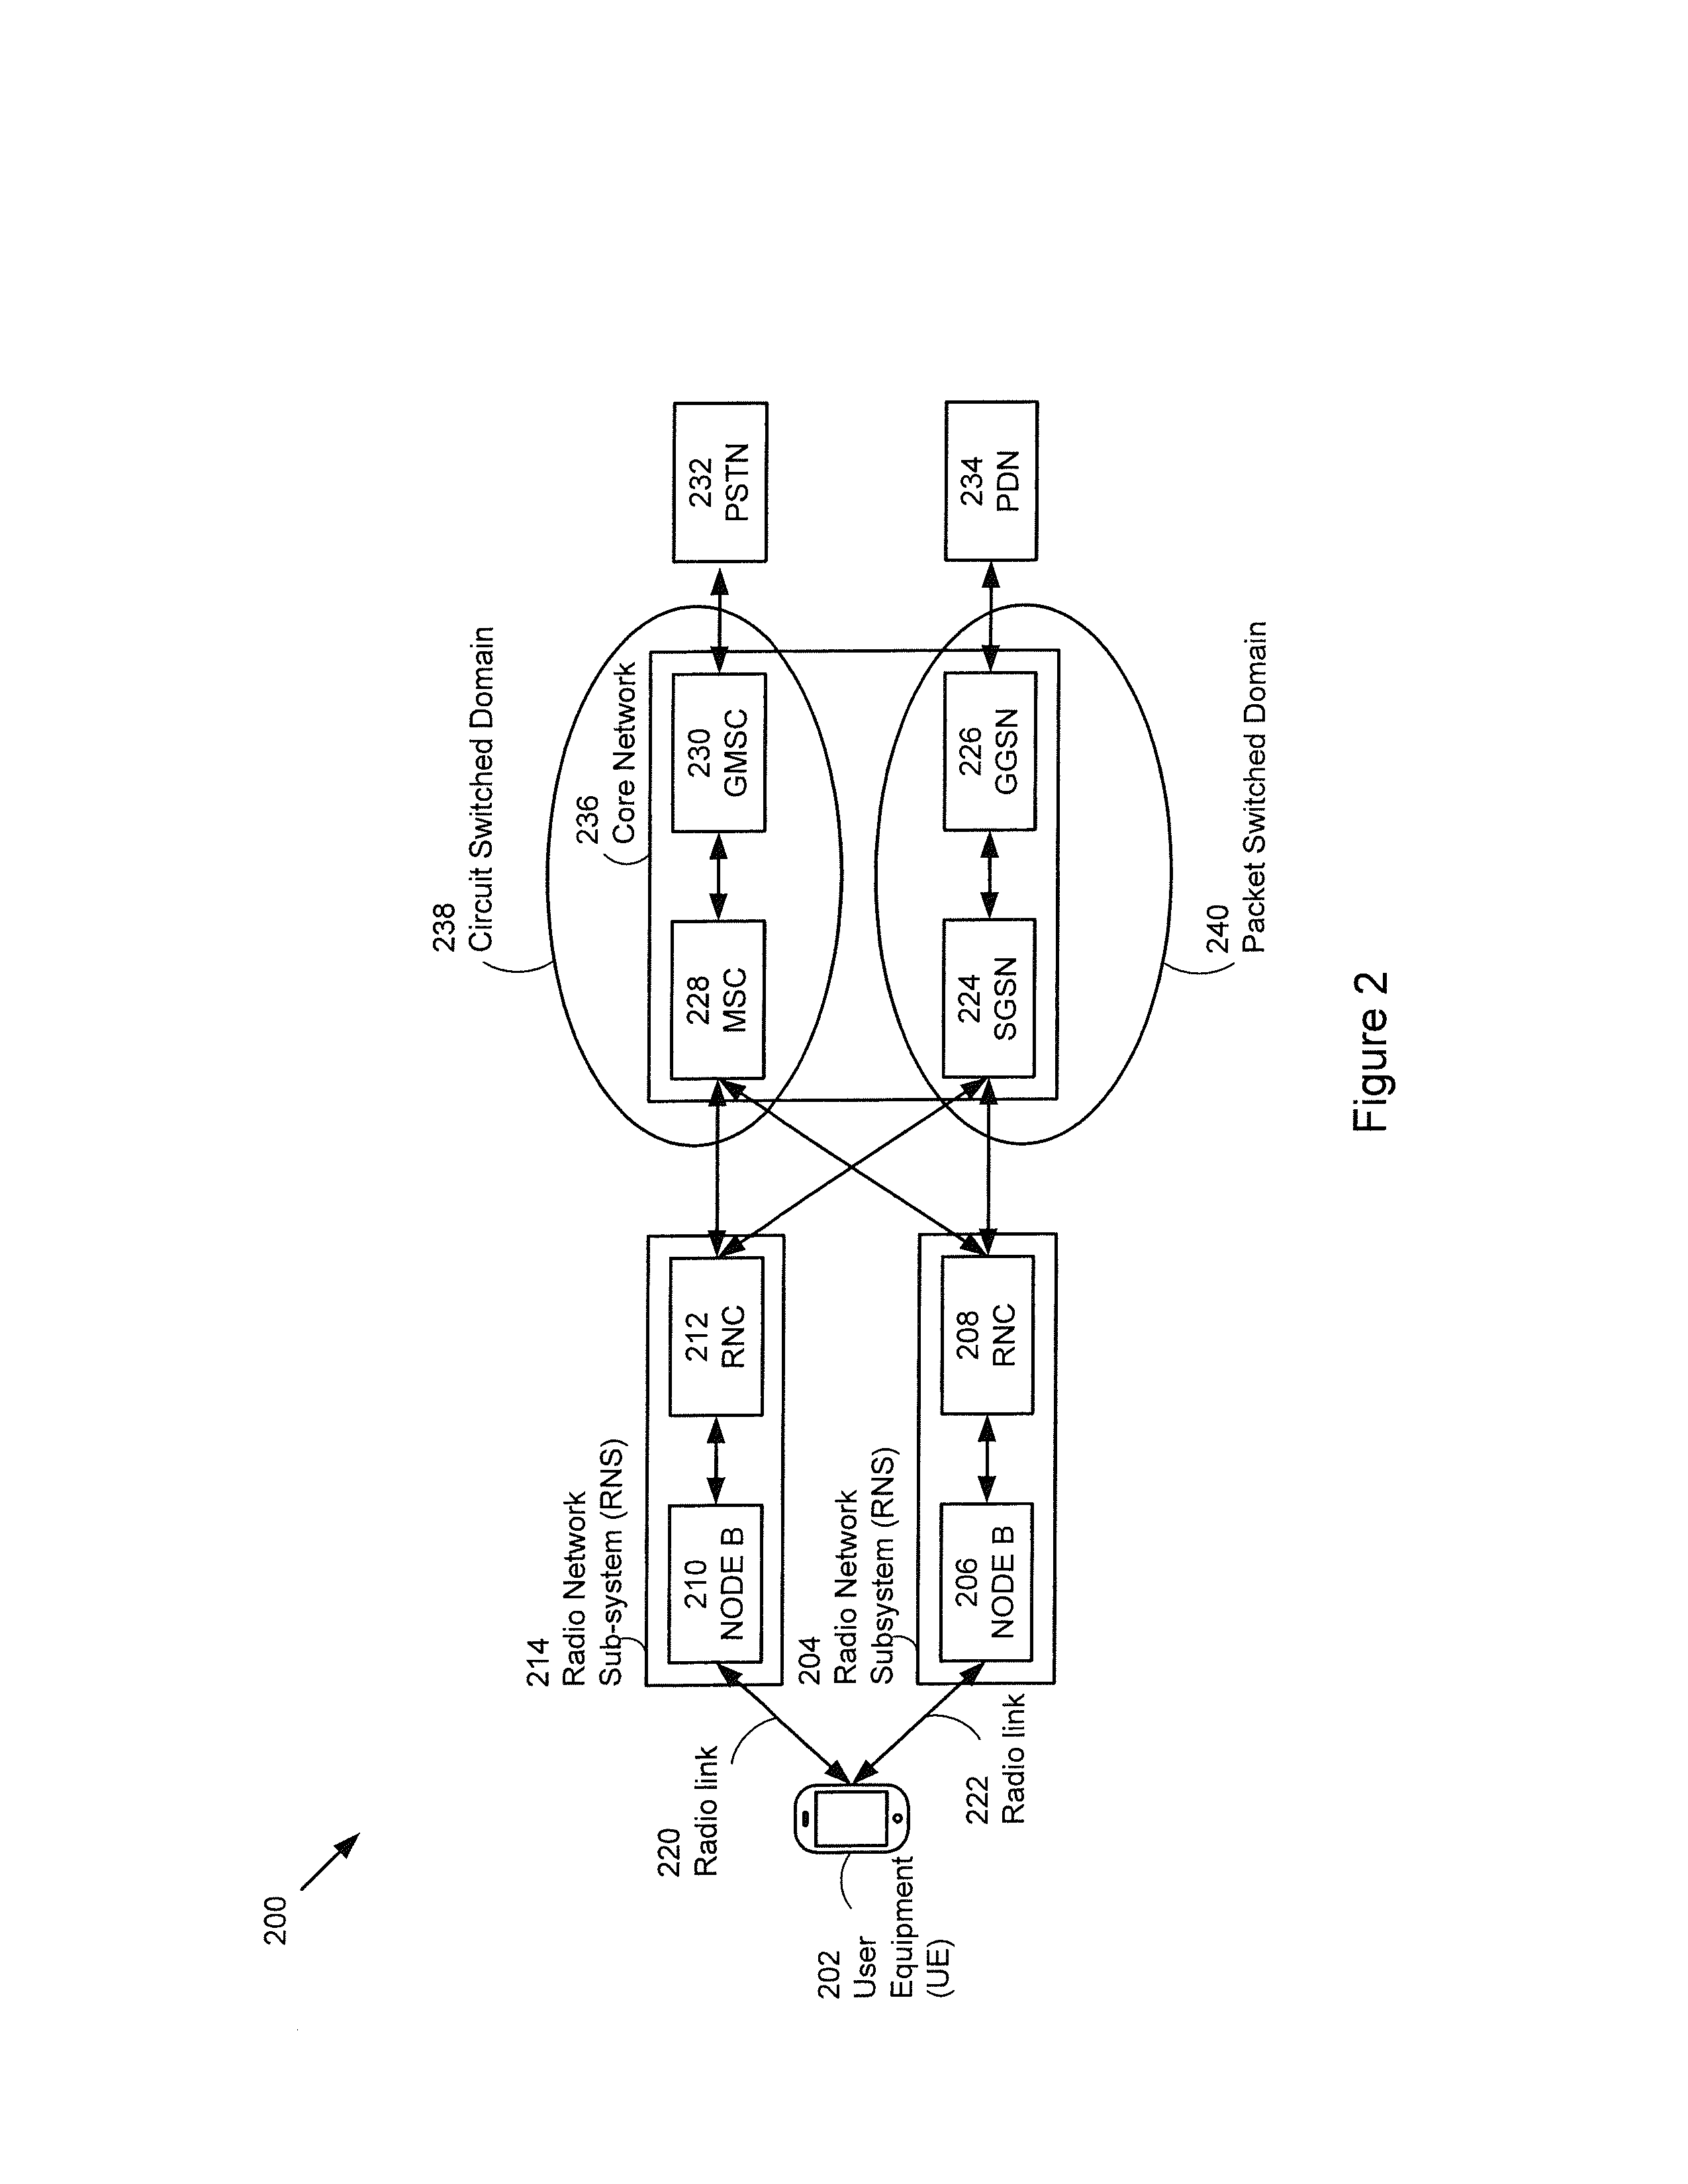 Methods to control multiple radio access bearers in a wireless device